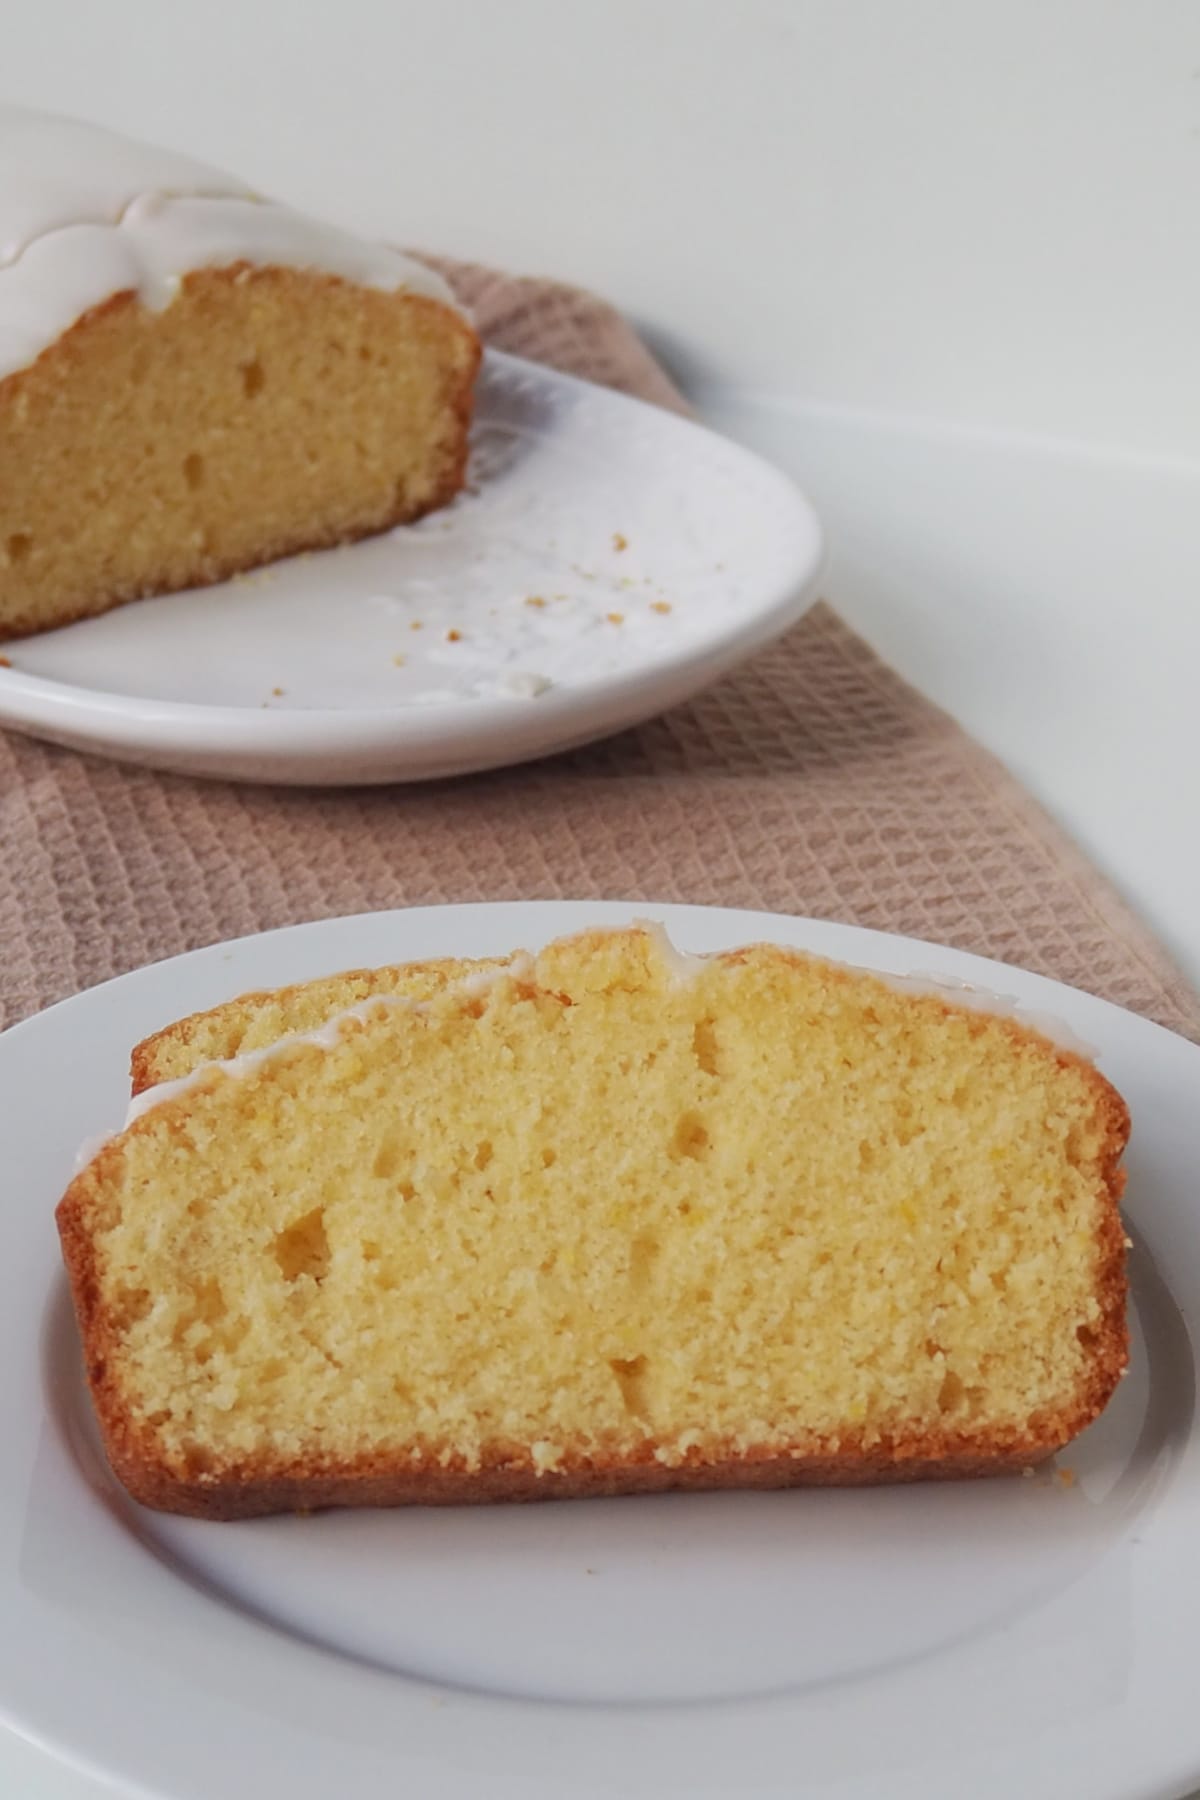 Two slices of Orange butter cake on a white plate. in the background is the rest of the cake on a white serving platter.